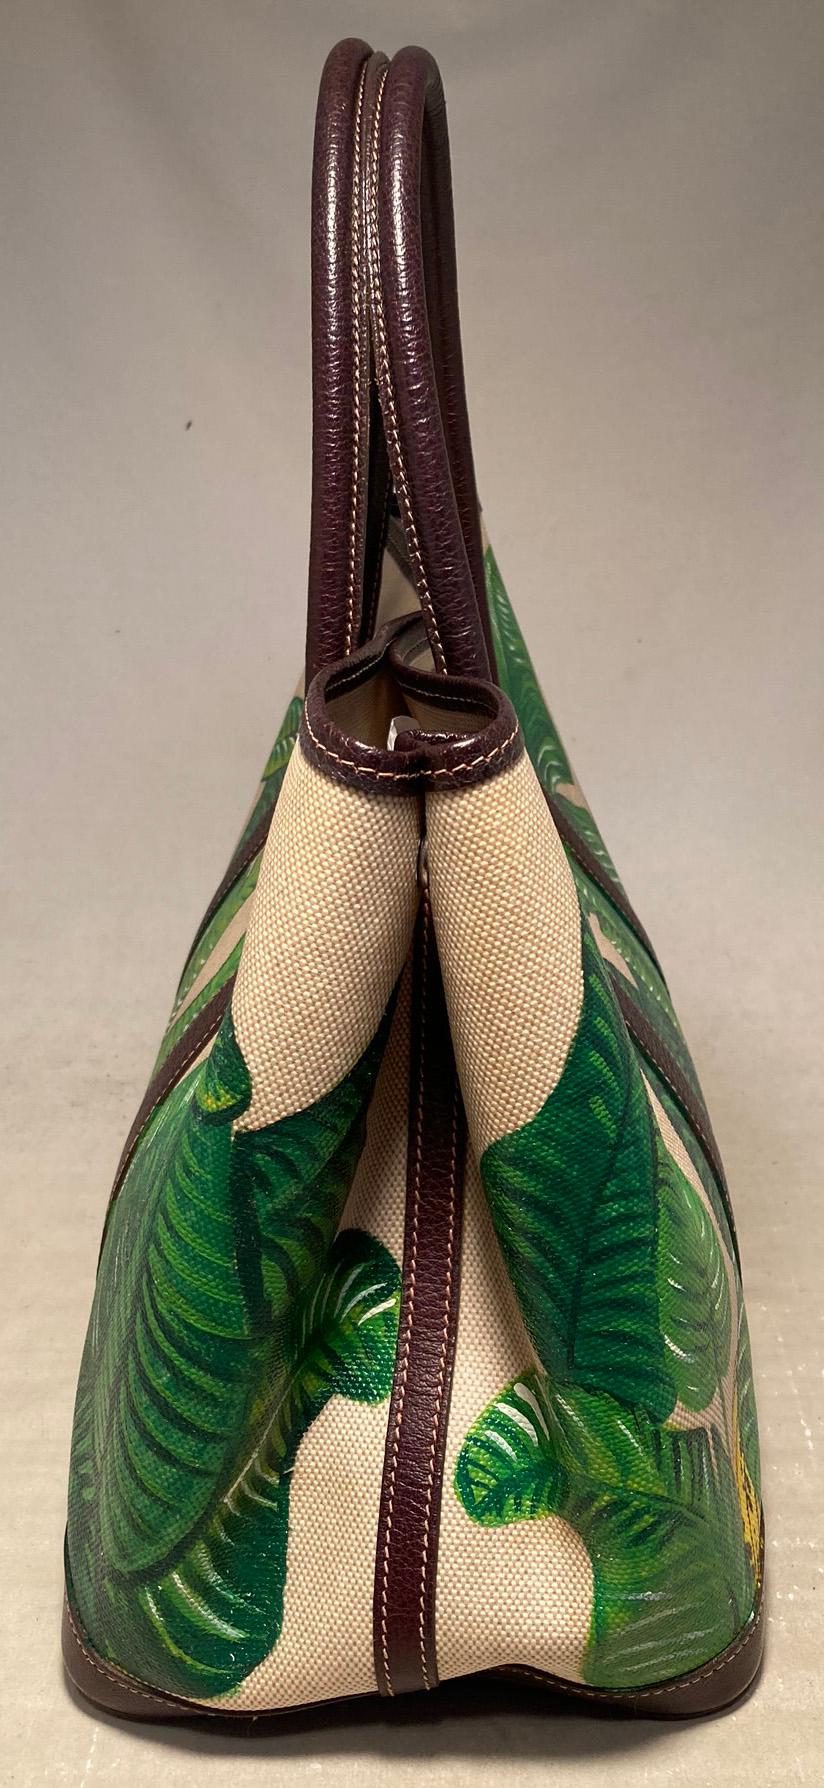 Hermes Hand Painted Banana Leaf Garden Party 35 in excellent condition. Signature woven beige canvas with dark brown leather handles, trim, and base. Hand painted green banana leaves painted on the surrounding beige canvas exterior. Top snap closure